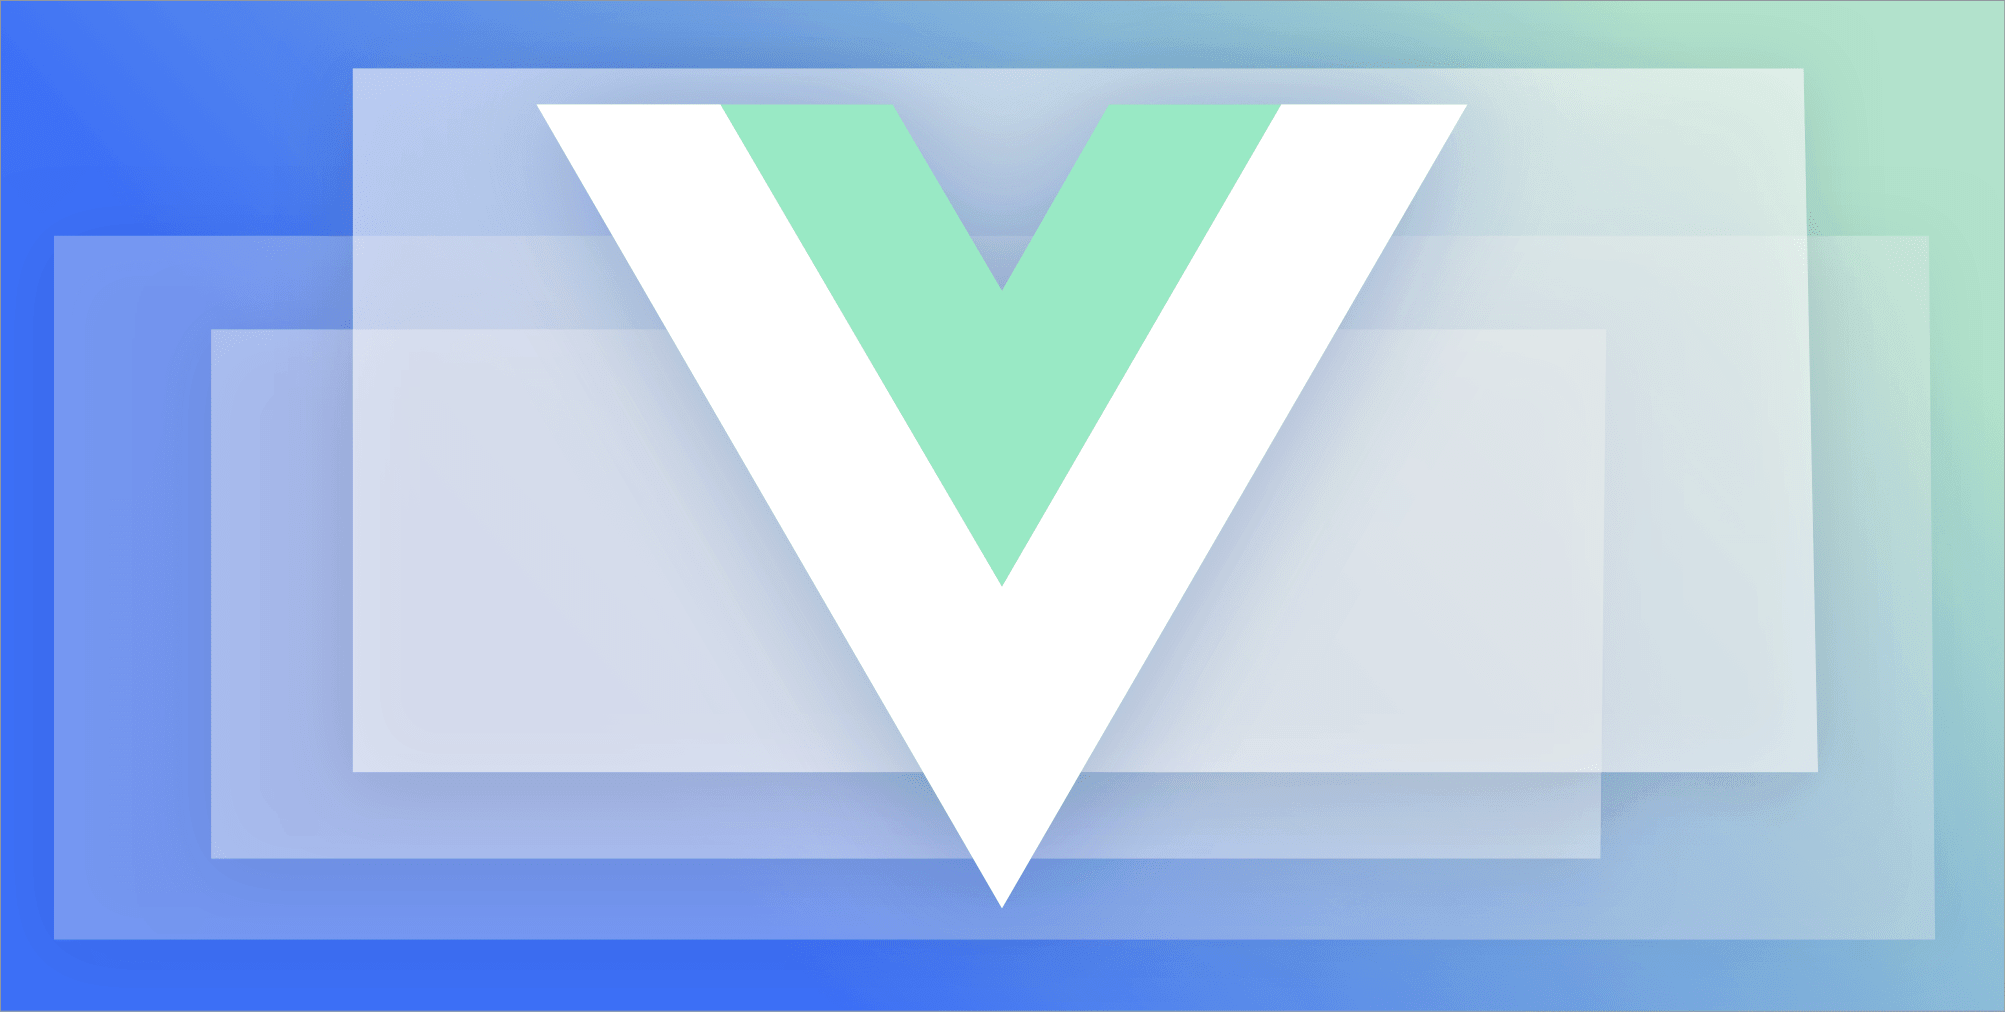 Vuex: State management for Vue Projects